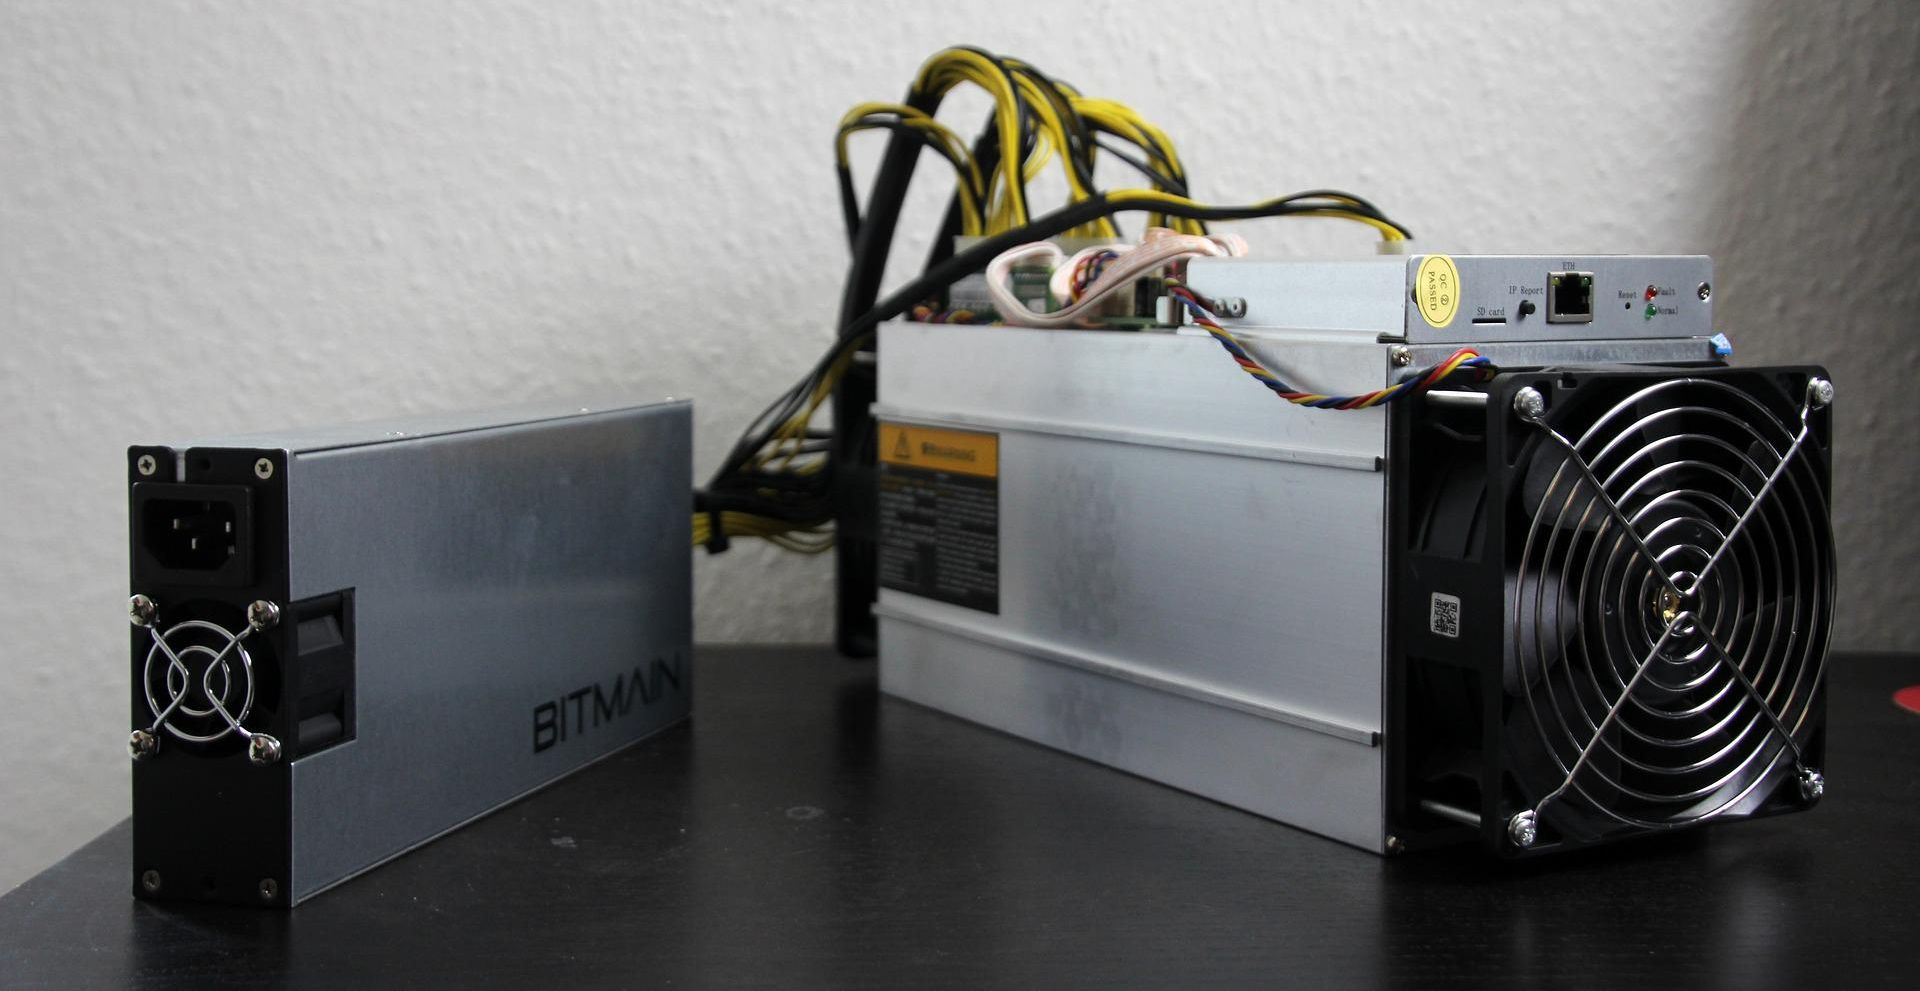 bitmain antminer on table